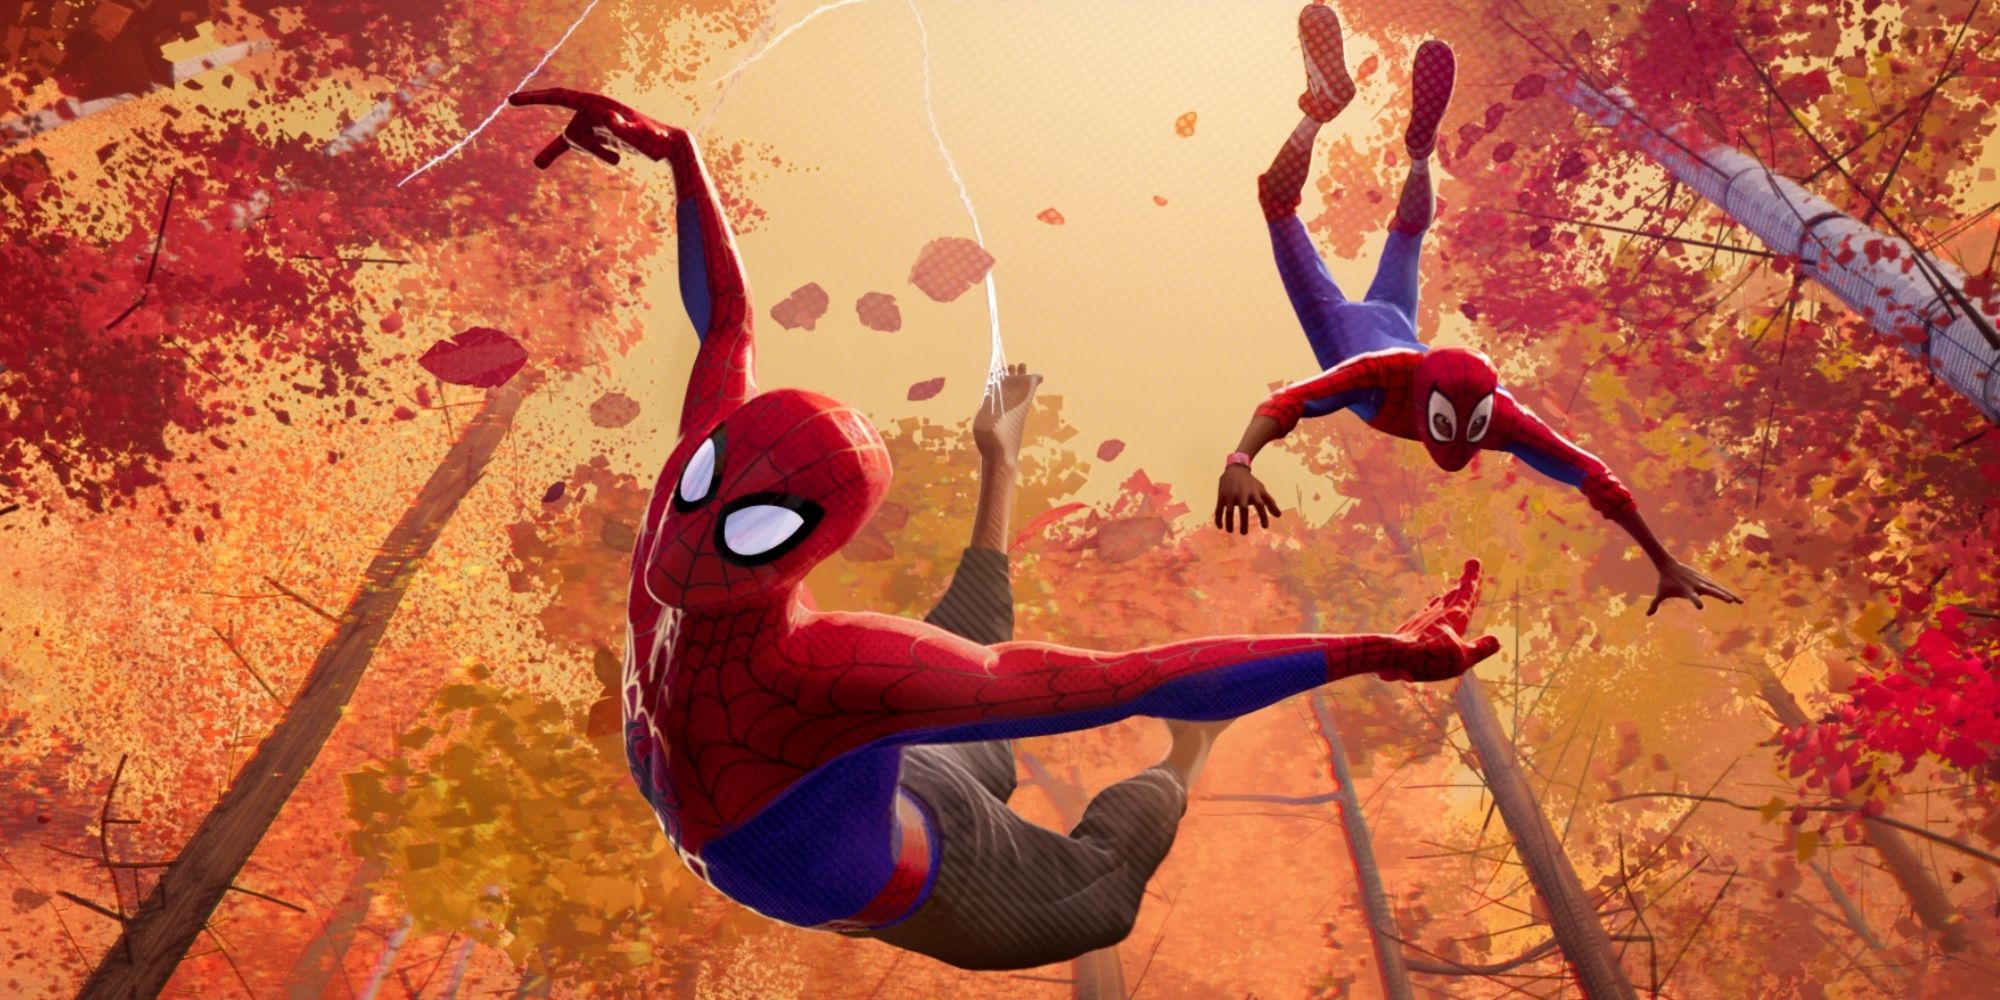 Peter B. Parker and Miles Morales web swinging in the woods in 'Spider-Man: Into the Spider-Verse' (2018)